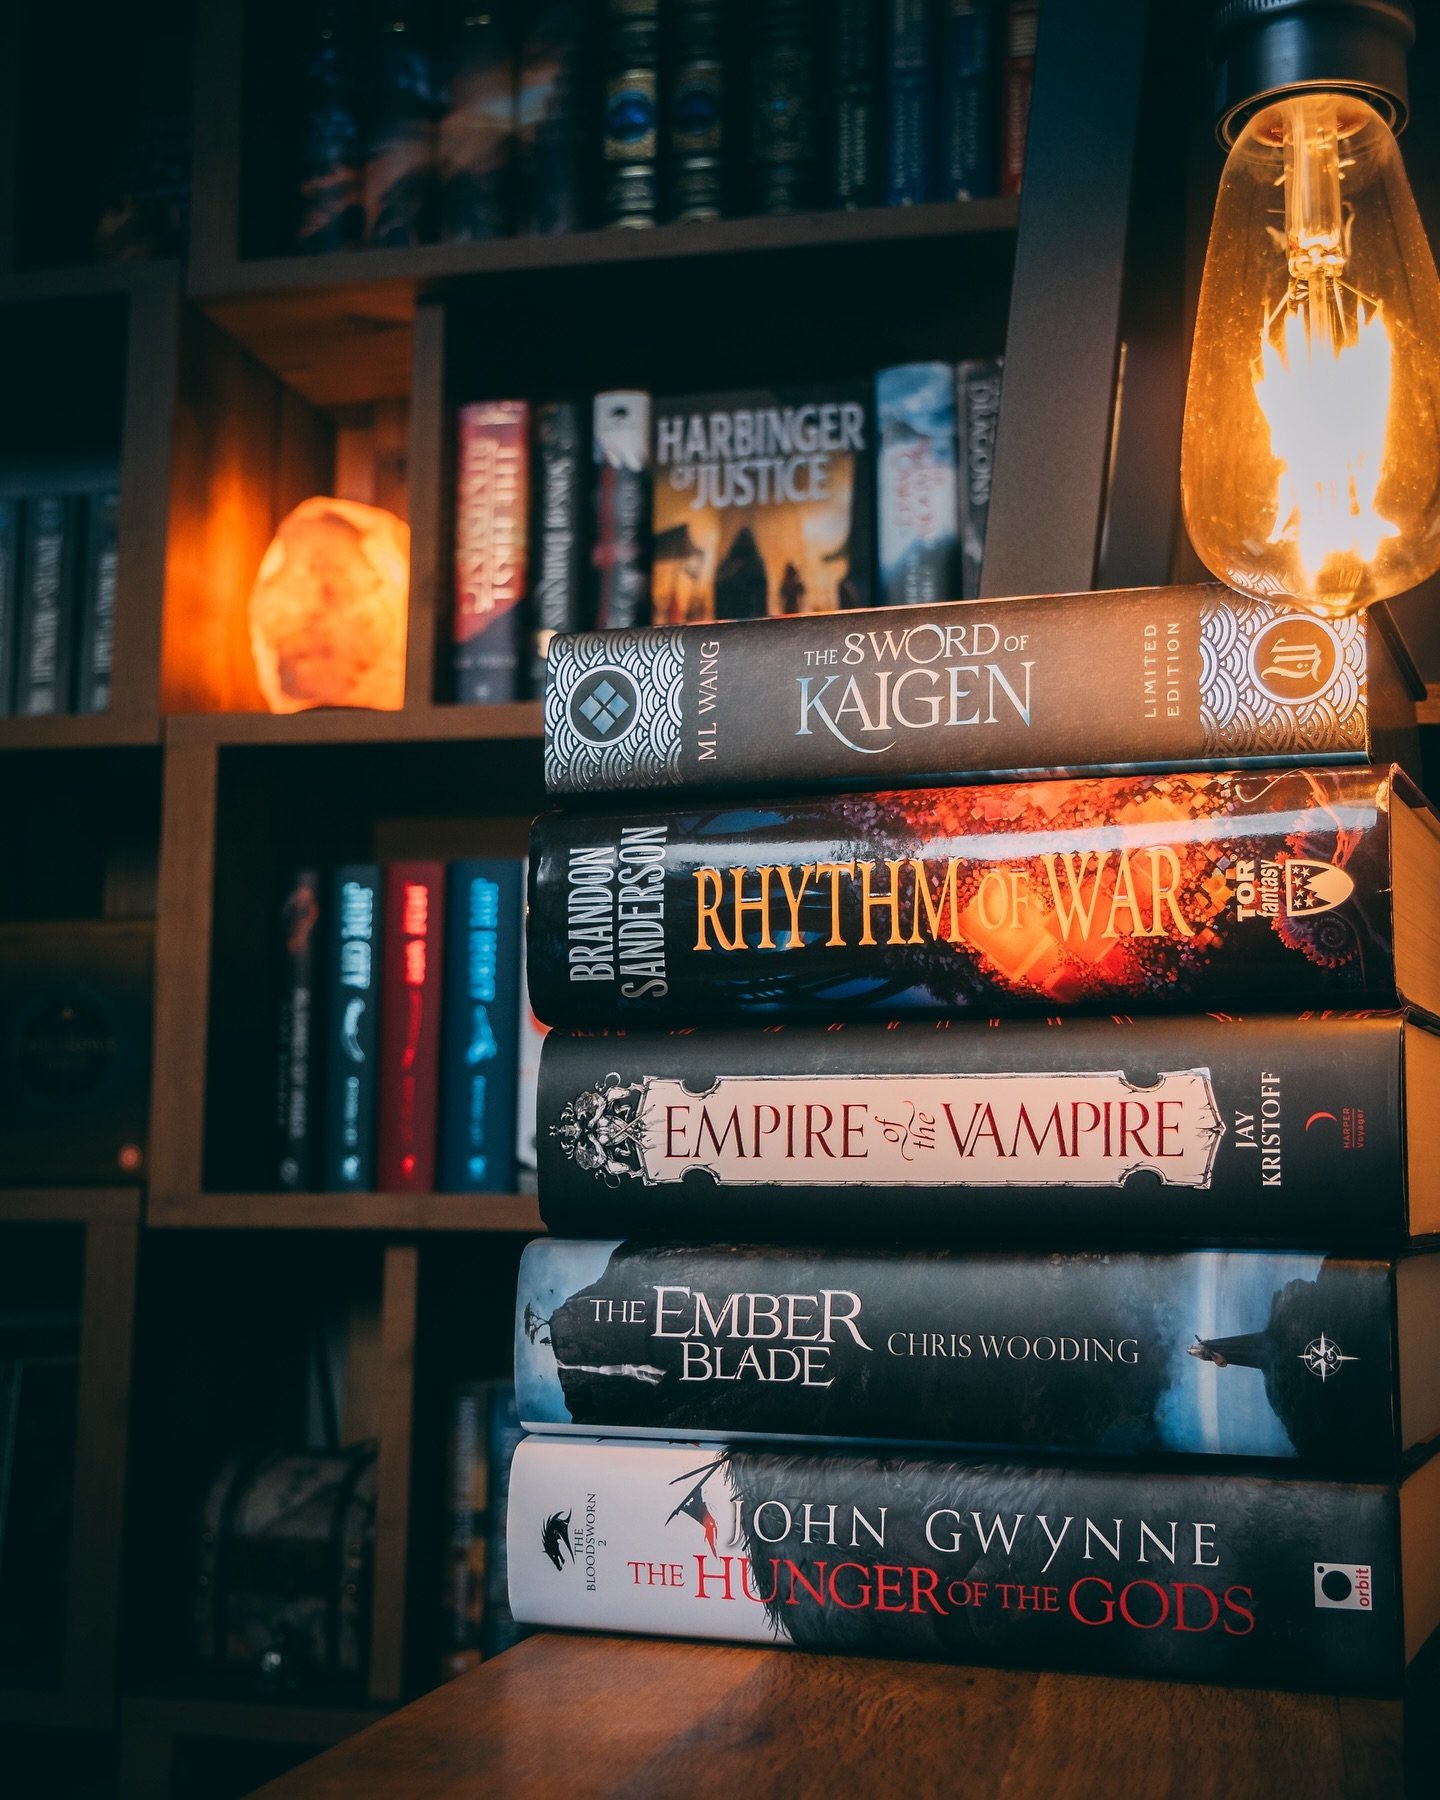 Minimalist Monday 🤌

📚 How many of these have you read? Any on your TBR?

Just a chunky book stack for this minimise Monday! All of them are terrific. 
.
.
.
.
.
#bookstagram #bookstack #fantasybook #fantasybooks #fantasybookstagram #bibliophile #b